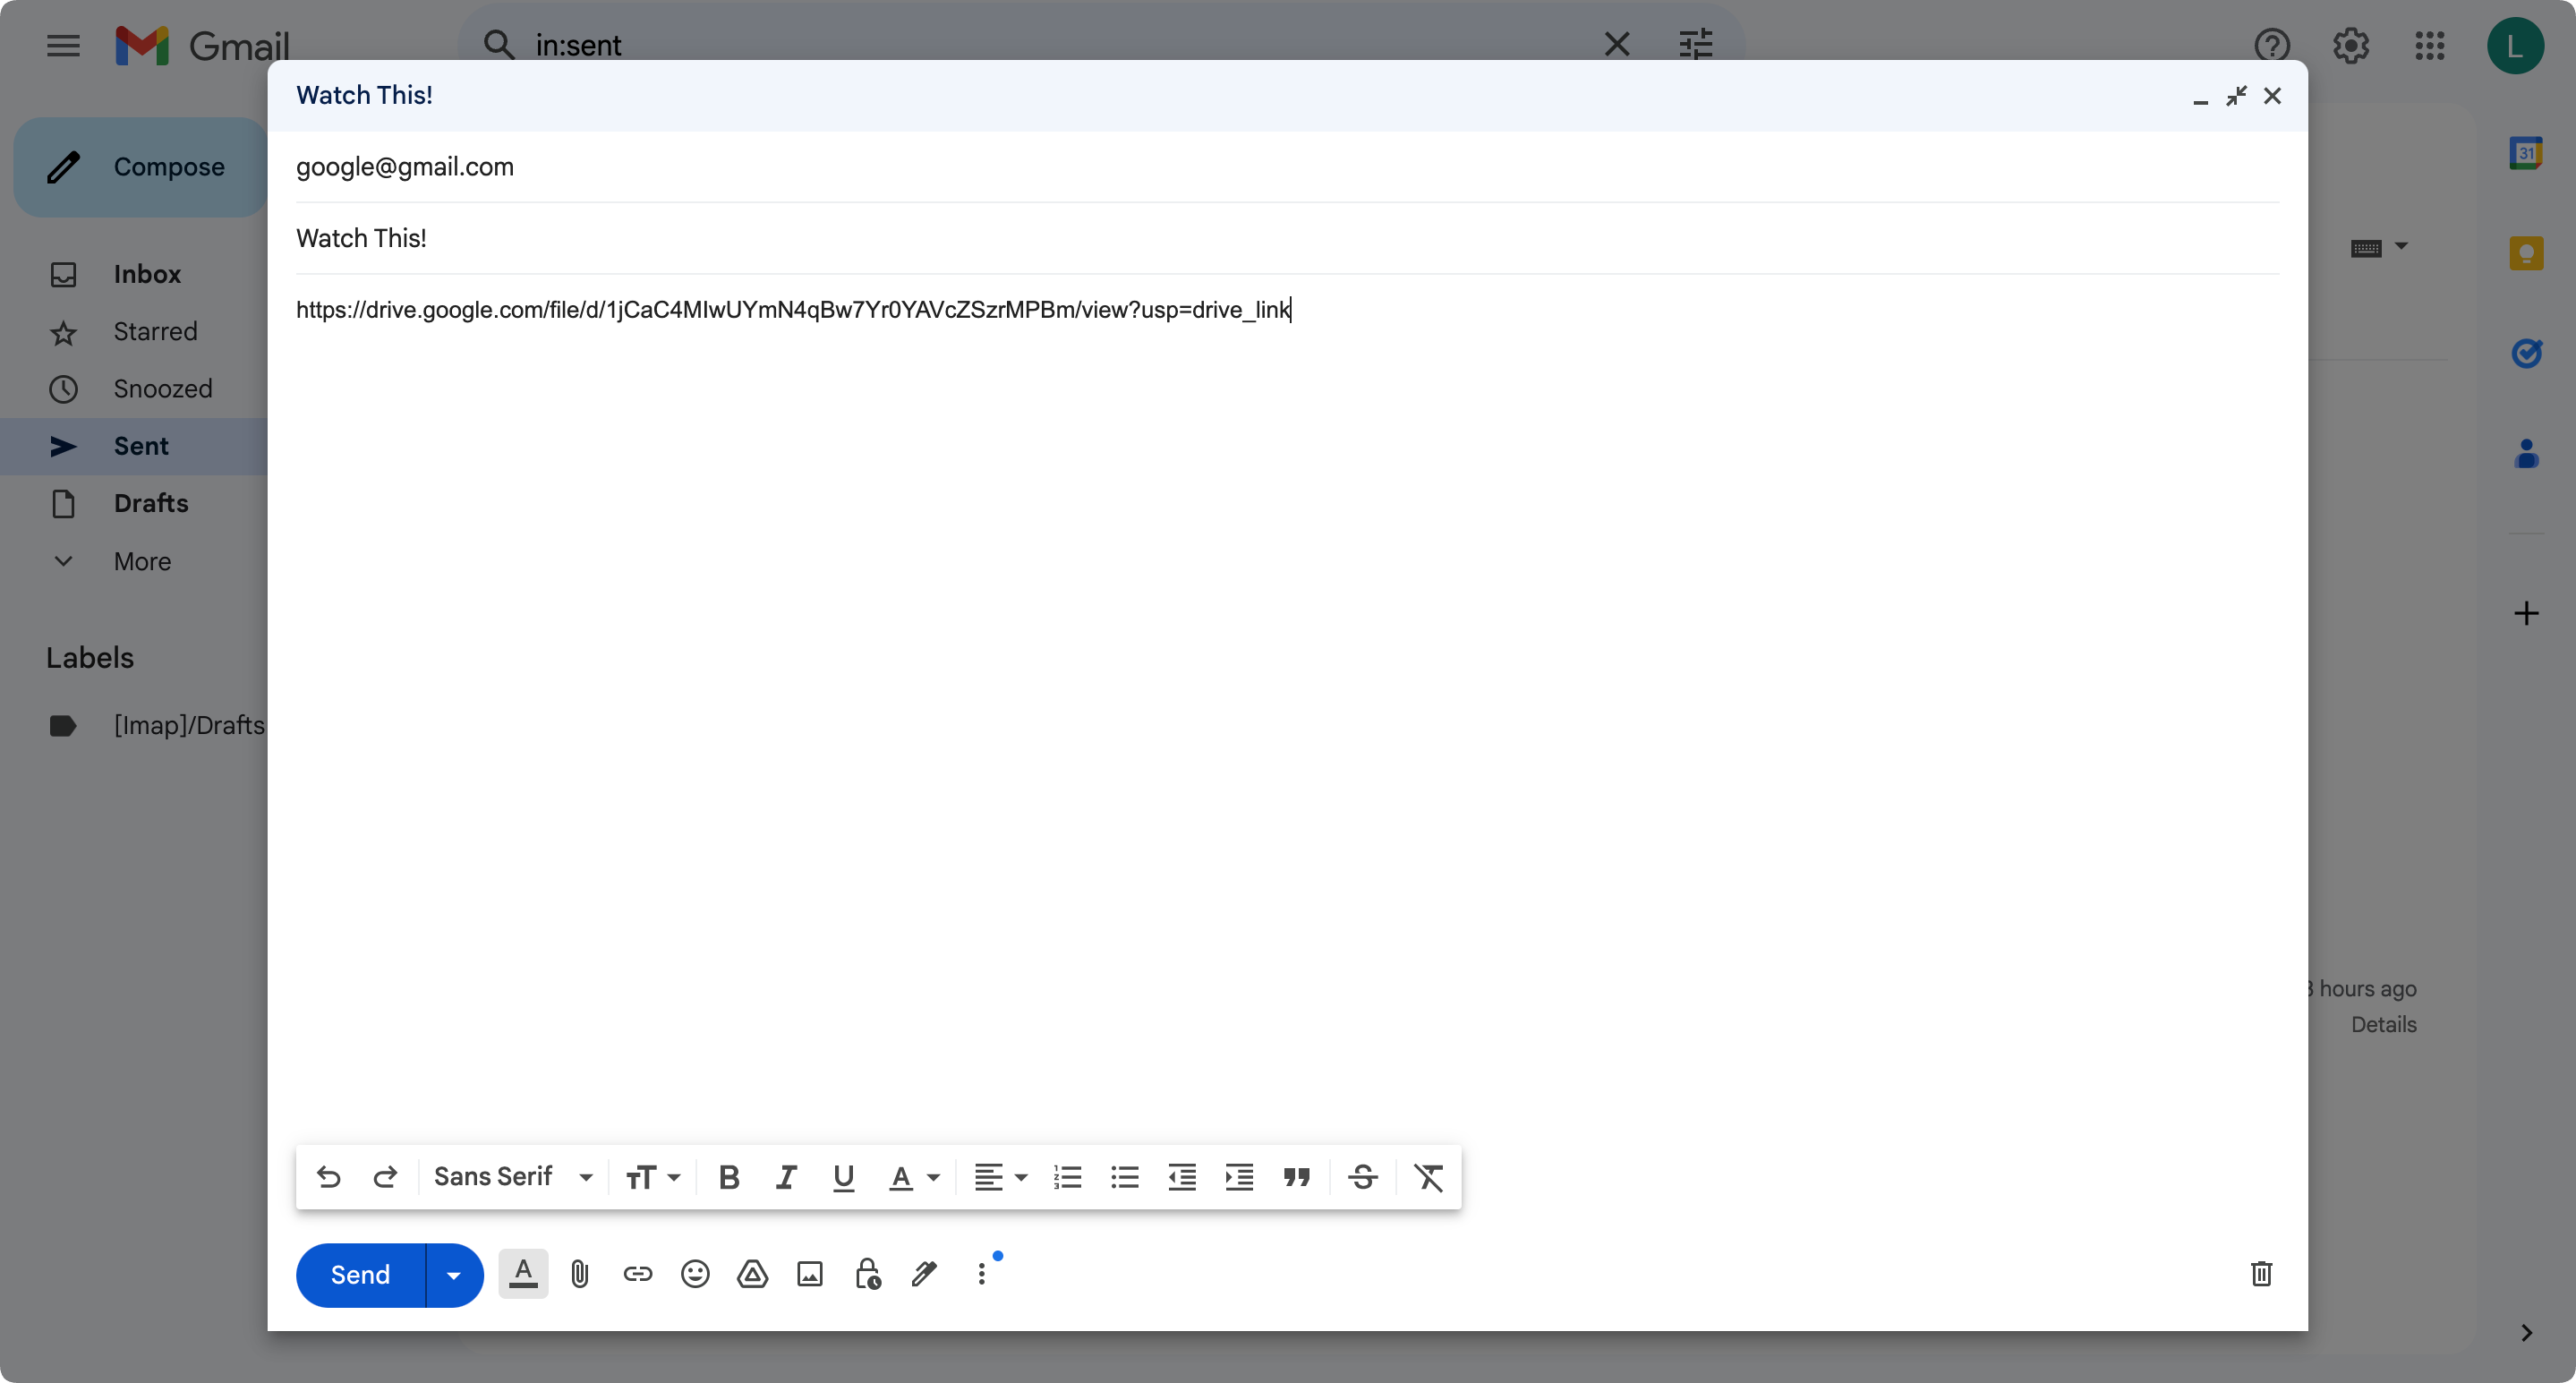 The Gmail's "New email" is shown.